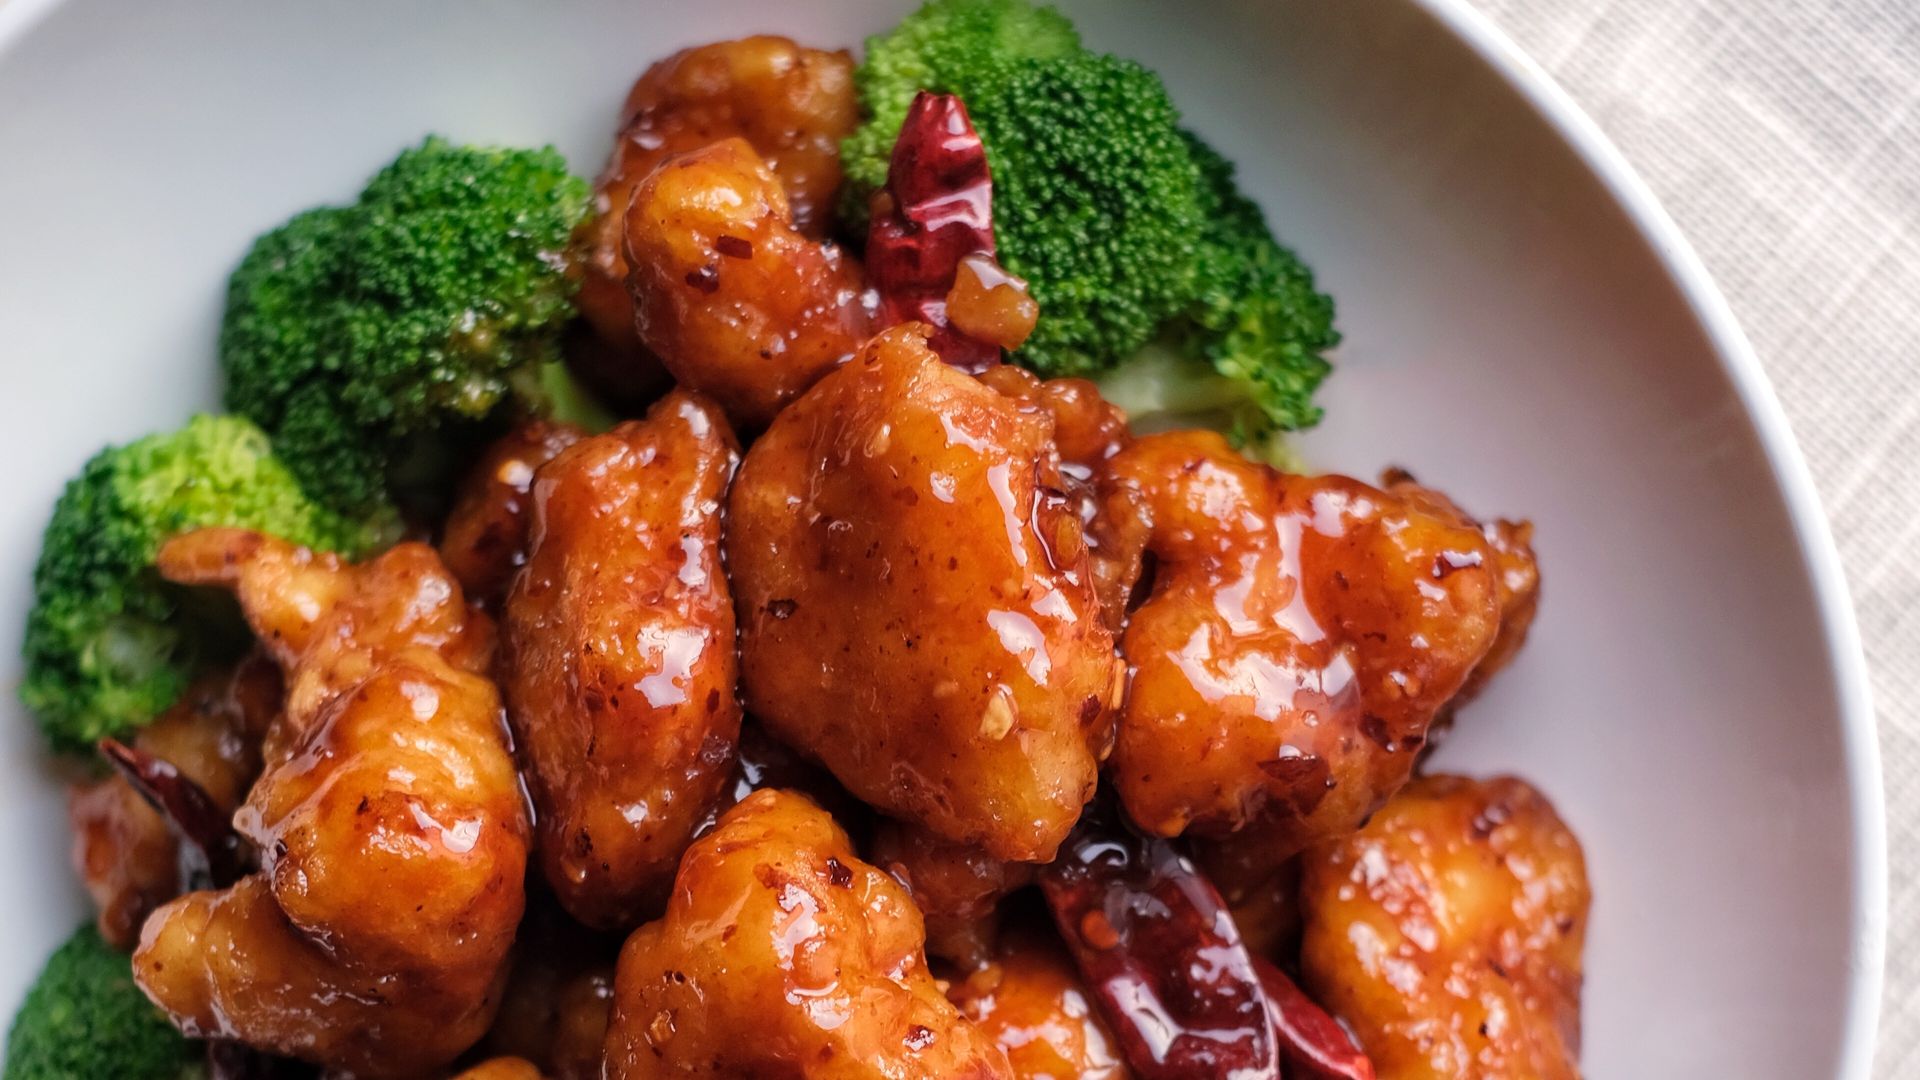 The General Tso chicken dish at Tso Chinese Delivery